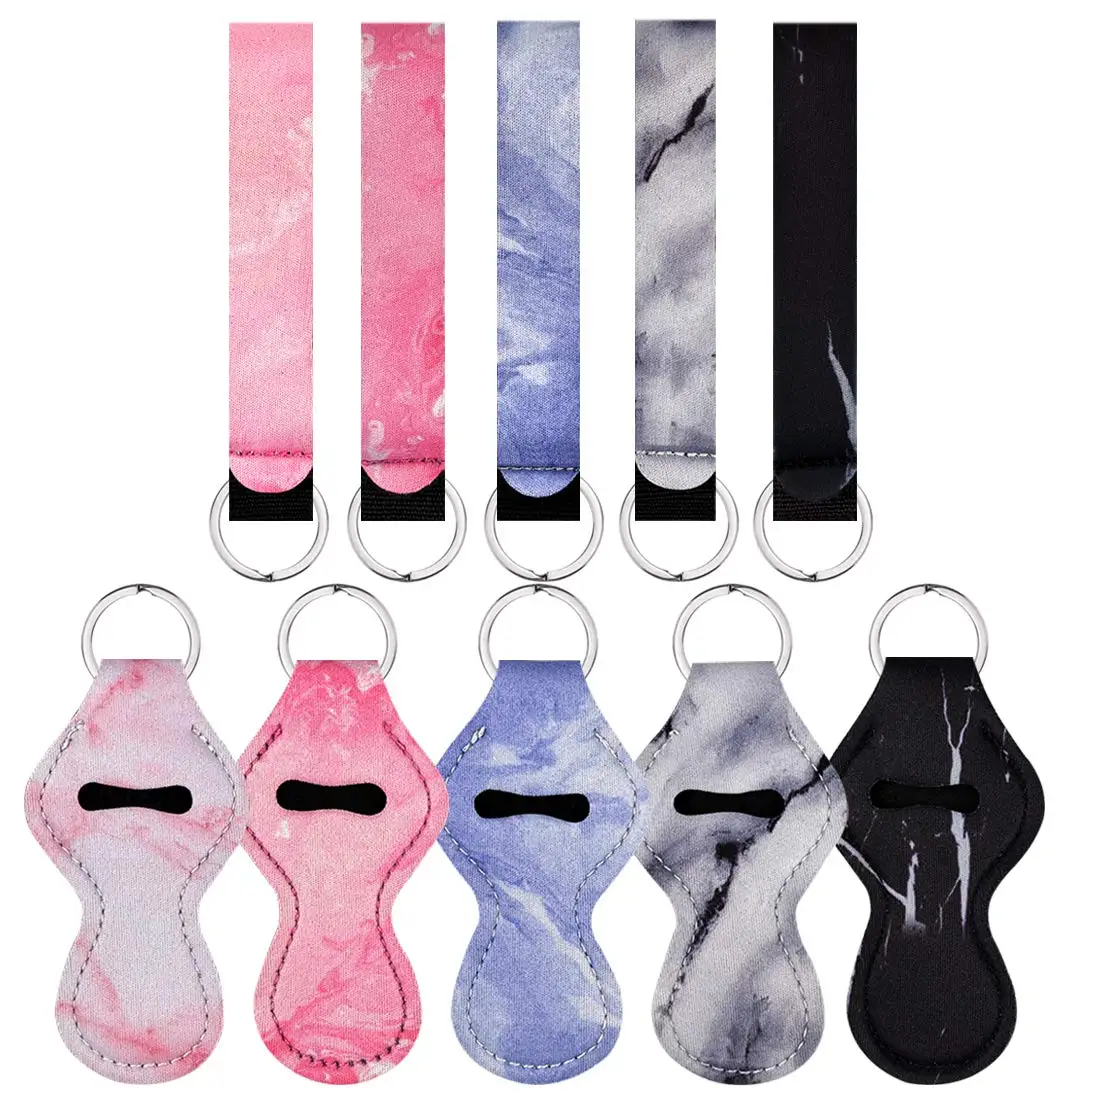 

5 Pairs Marble Style Chapstick Holder Keychains Neoprene Lipstick Holder Keychain Protective Cases with Wristlet Lanyard